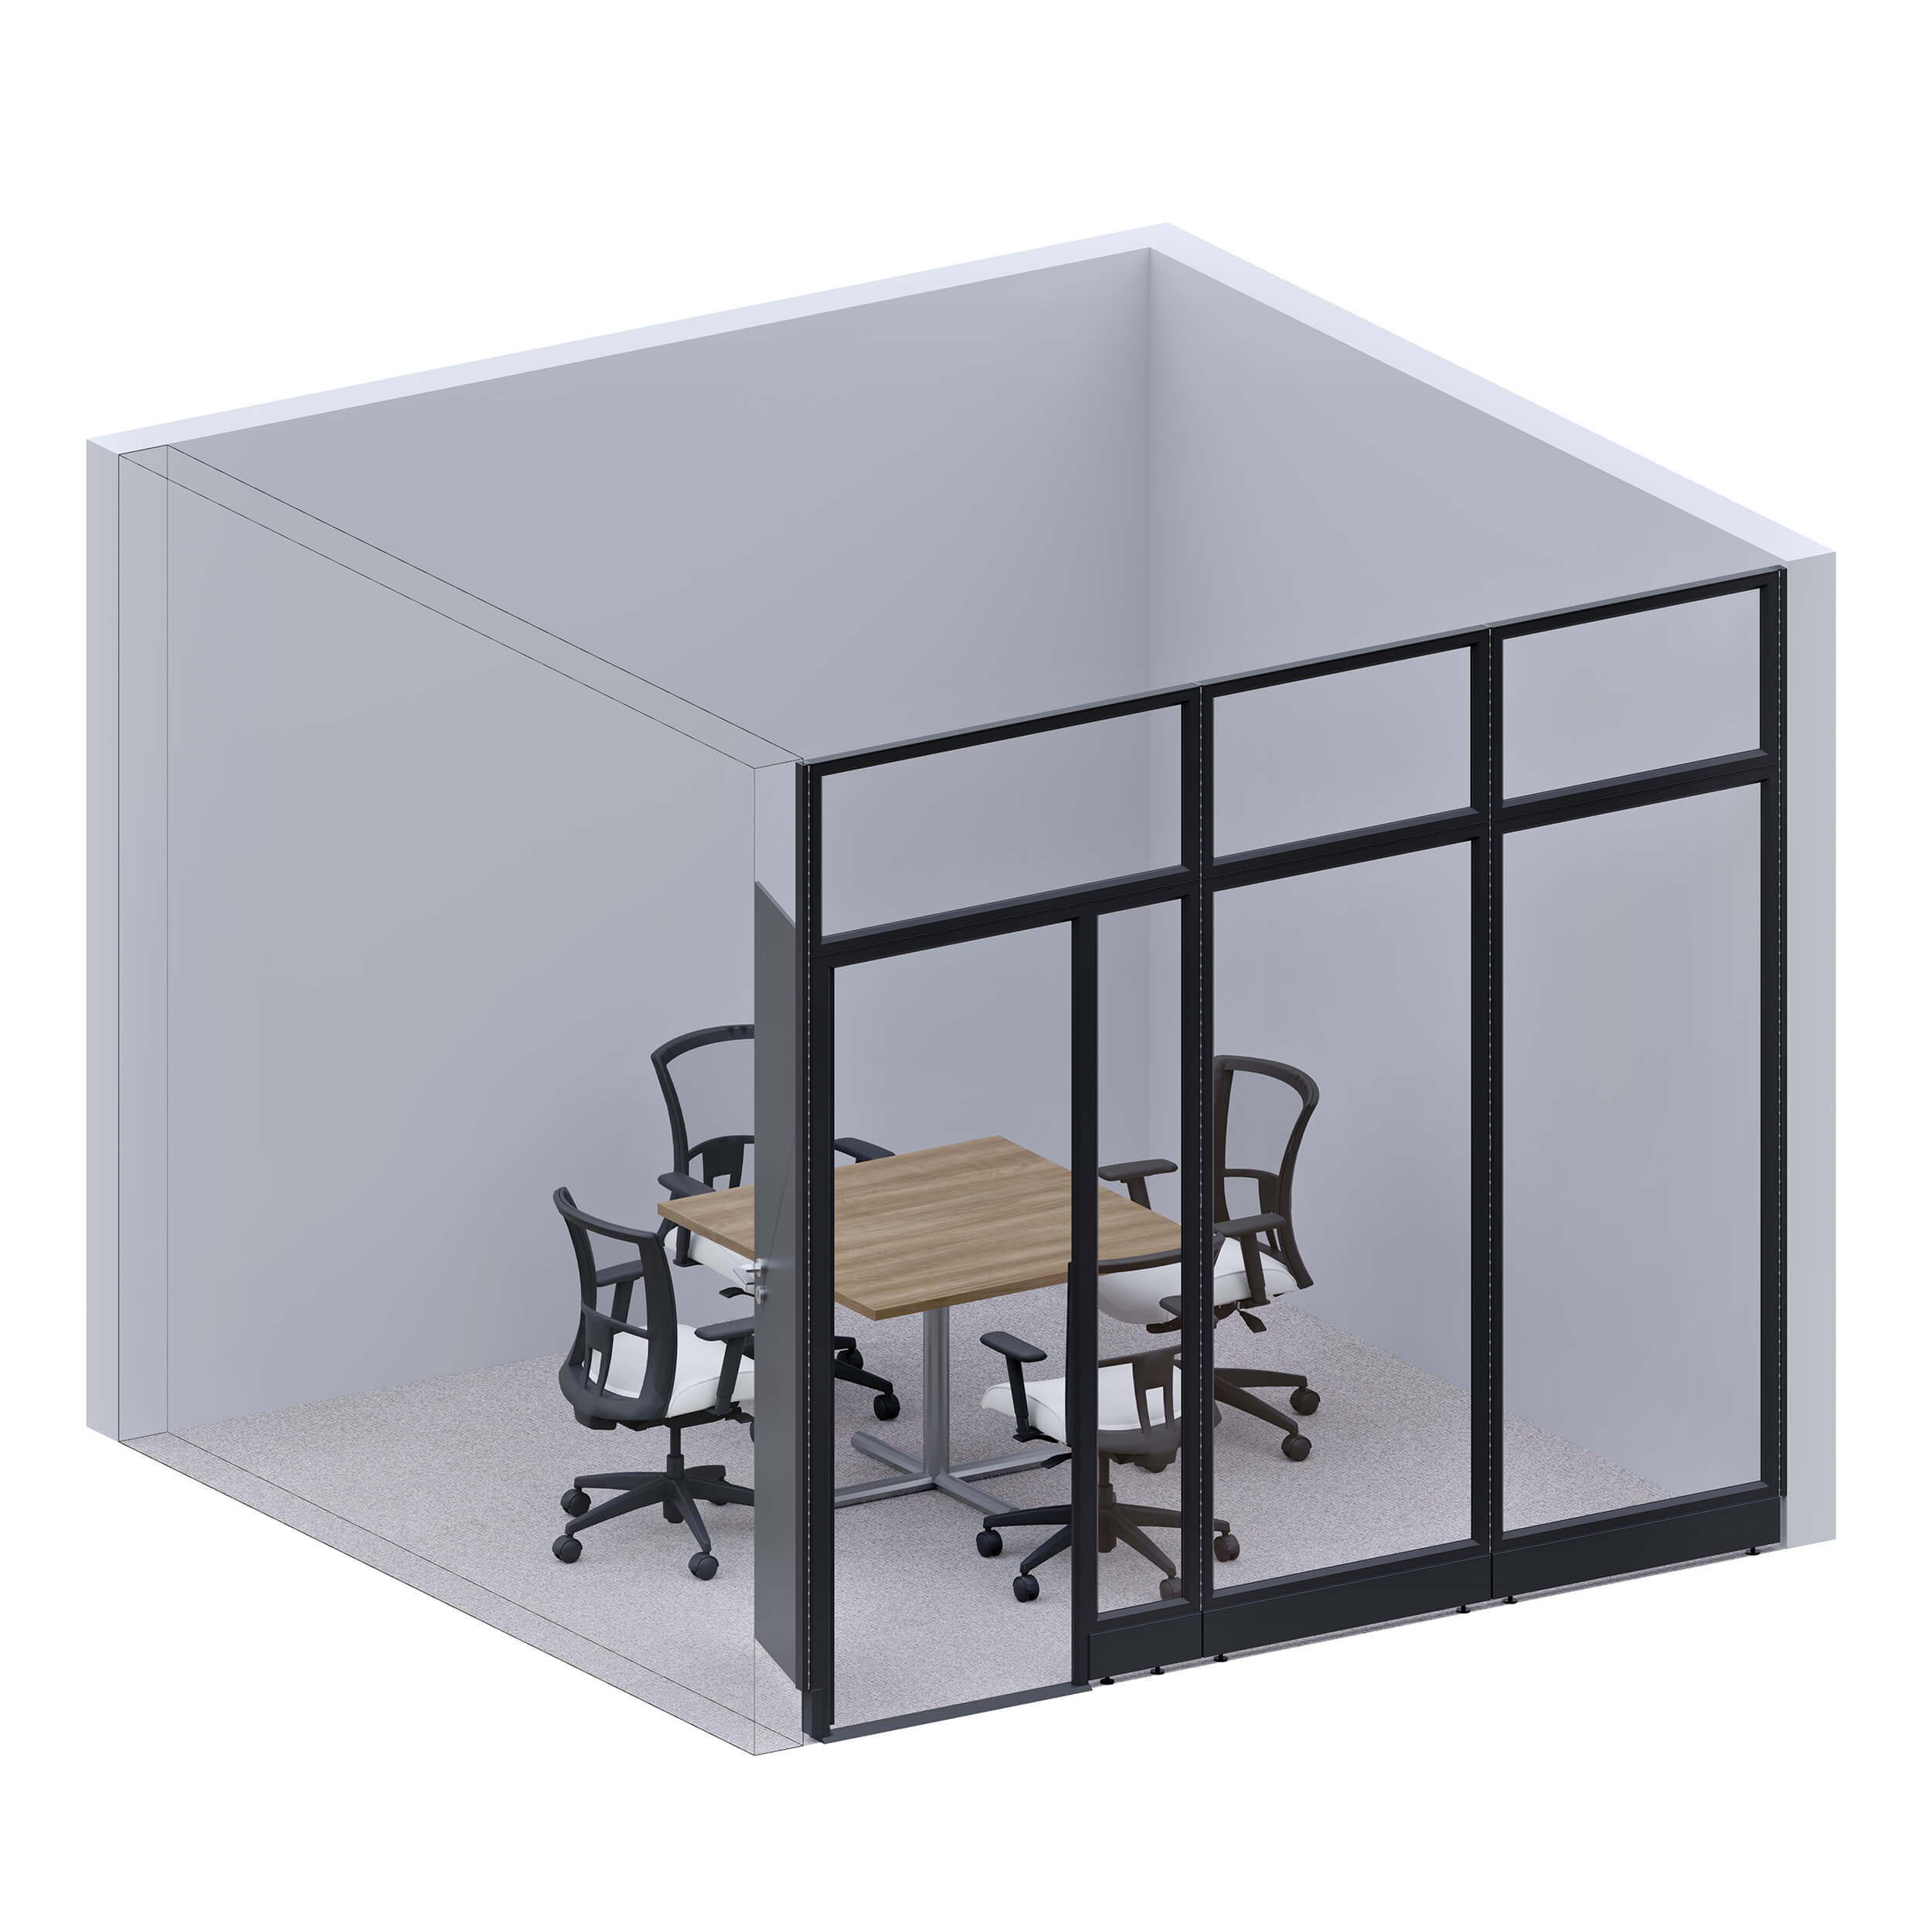 office-walls-glass-wall-conference-room-107h-i-shape.jpg